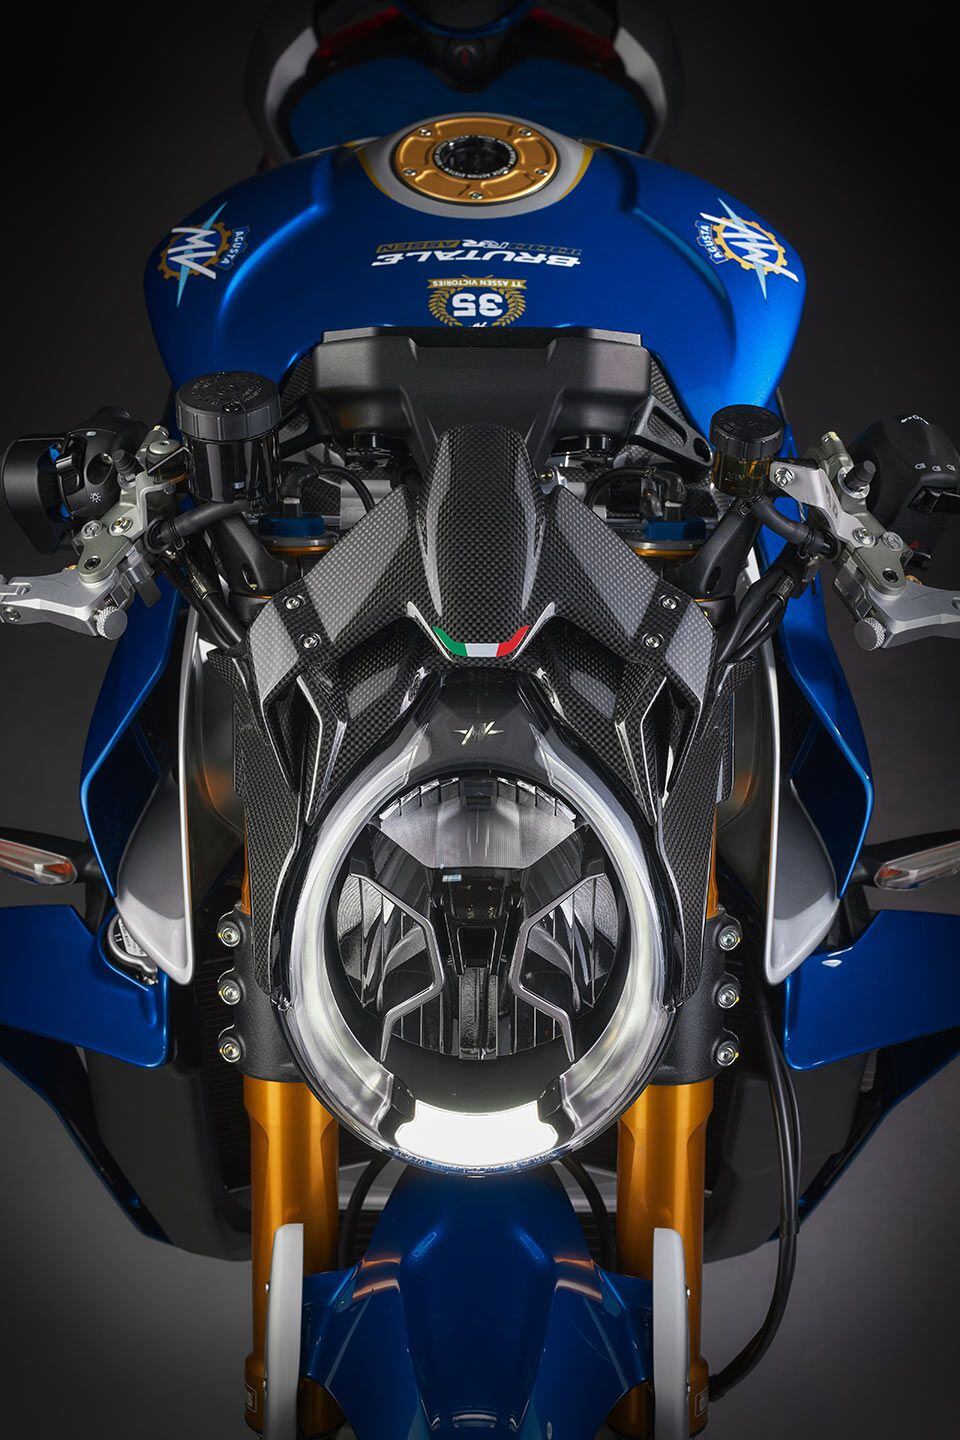 Only 300 examples of the Brutale 1000 RR Assen are available.